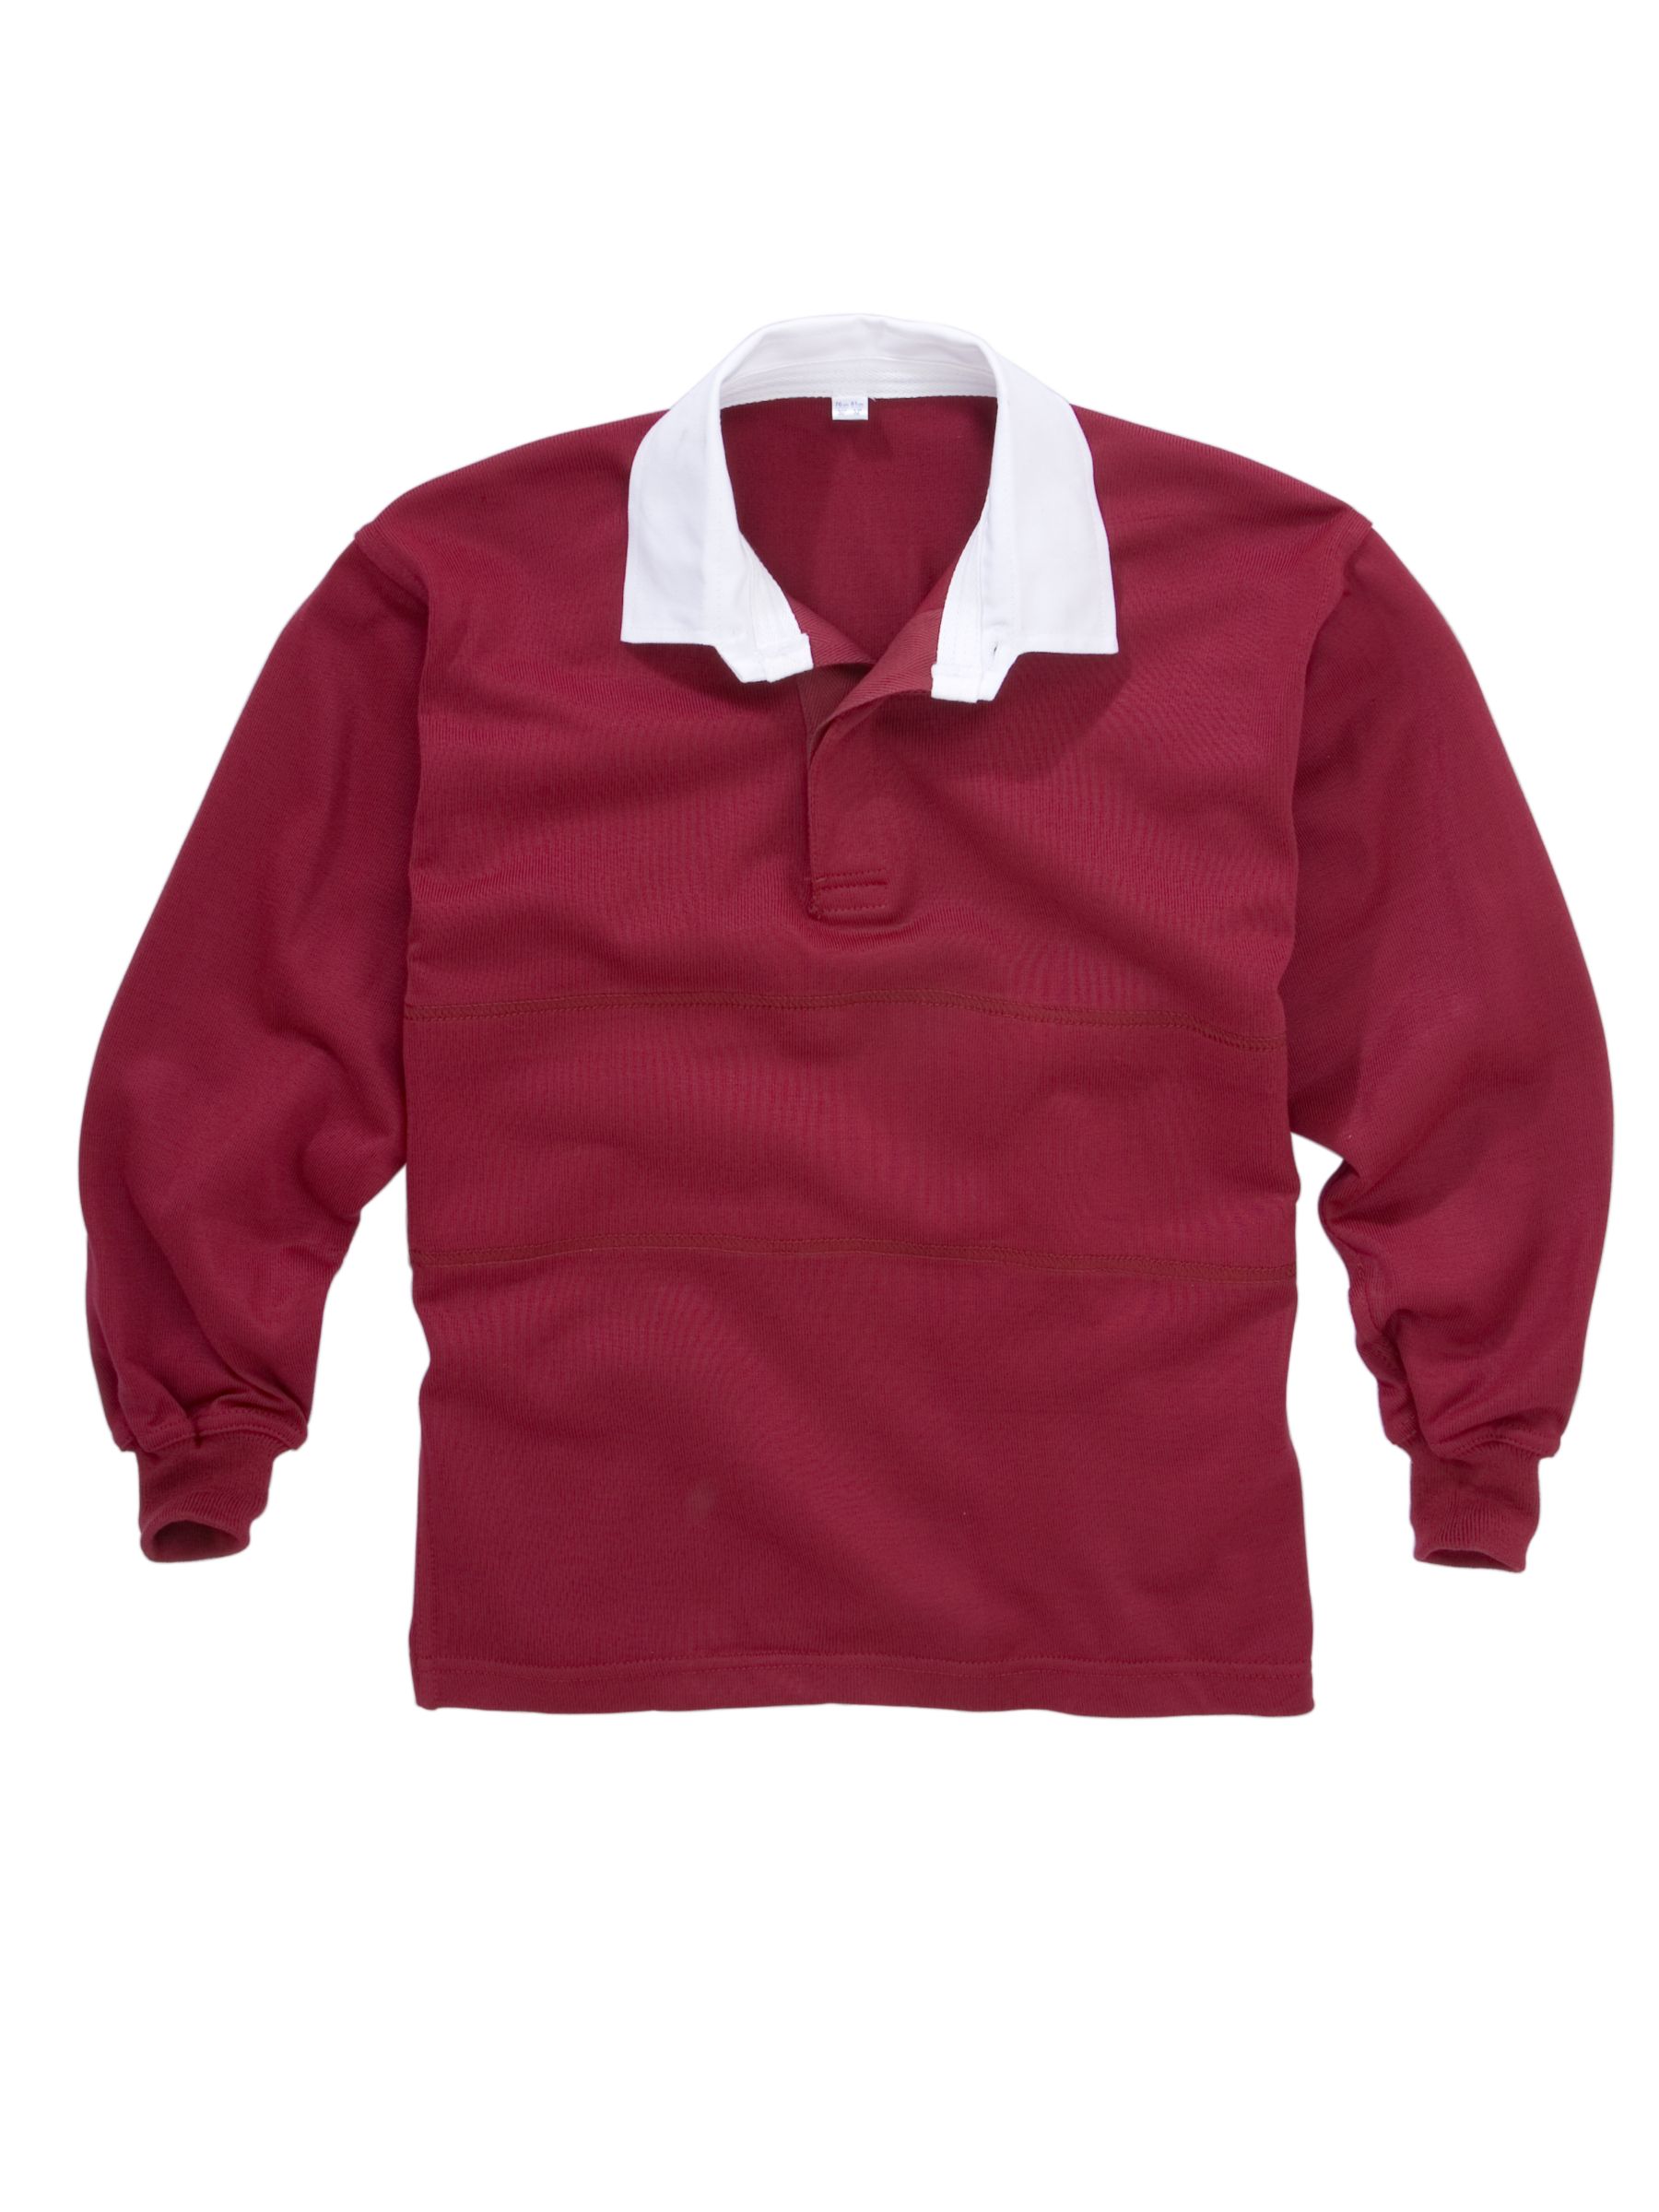 Other Schools Unisex Rugby Shirt 97686